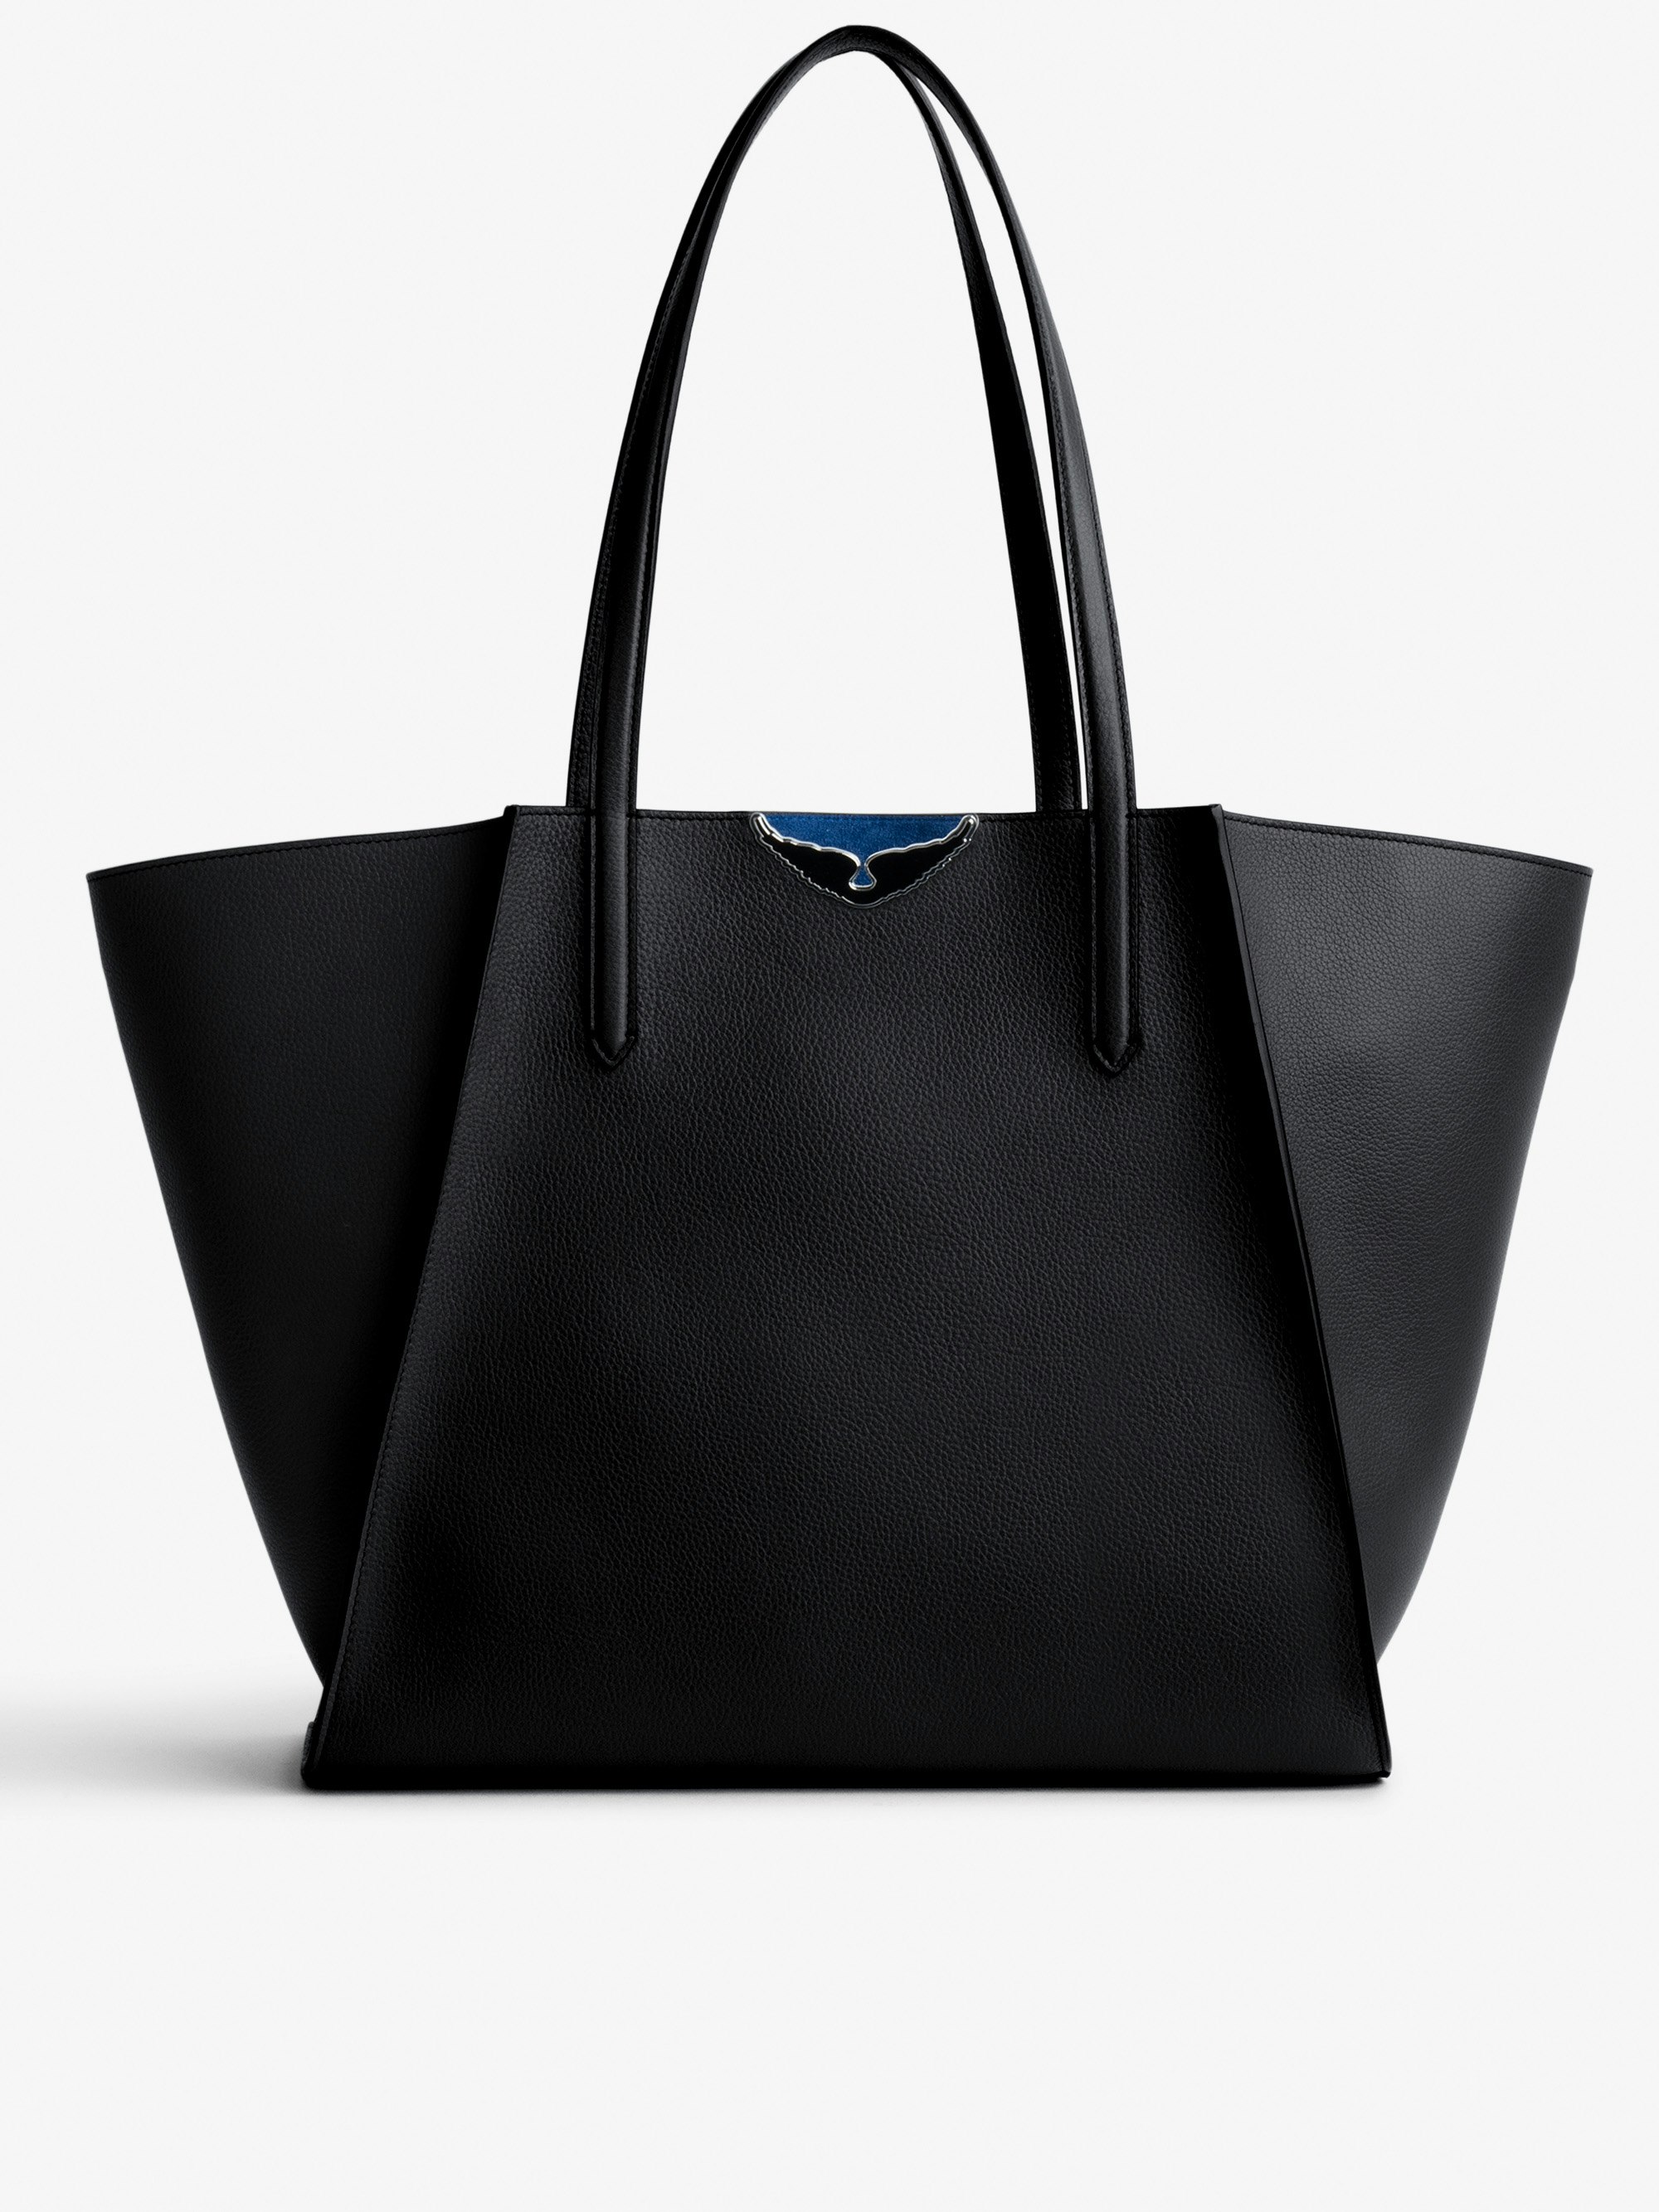 Le Borderline Bag - Women’s reversible tote bag in black grained leather and blue suede with black lacquered wings